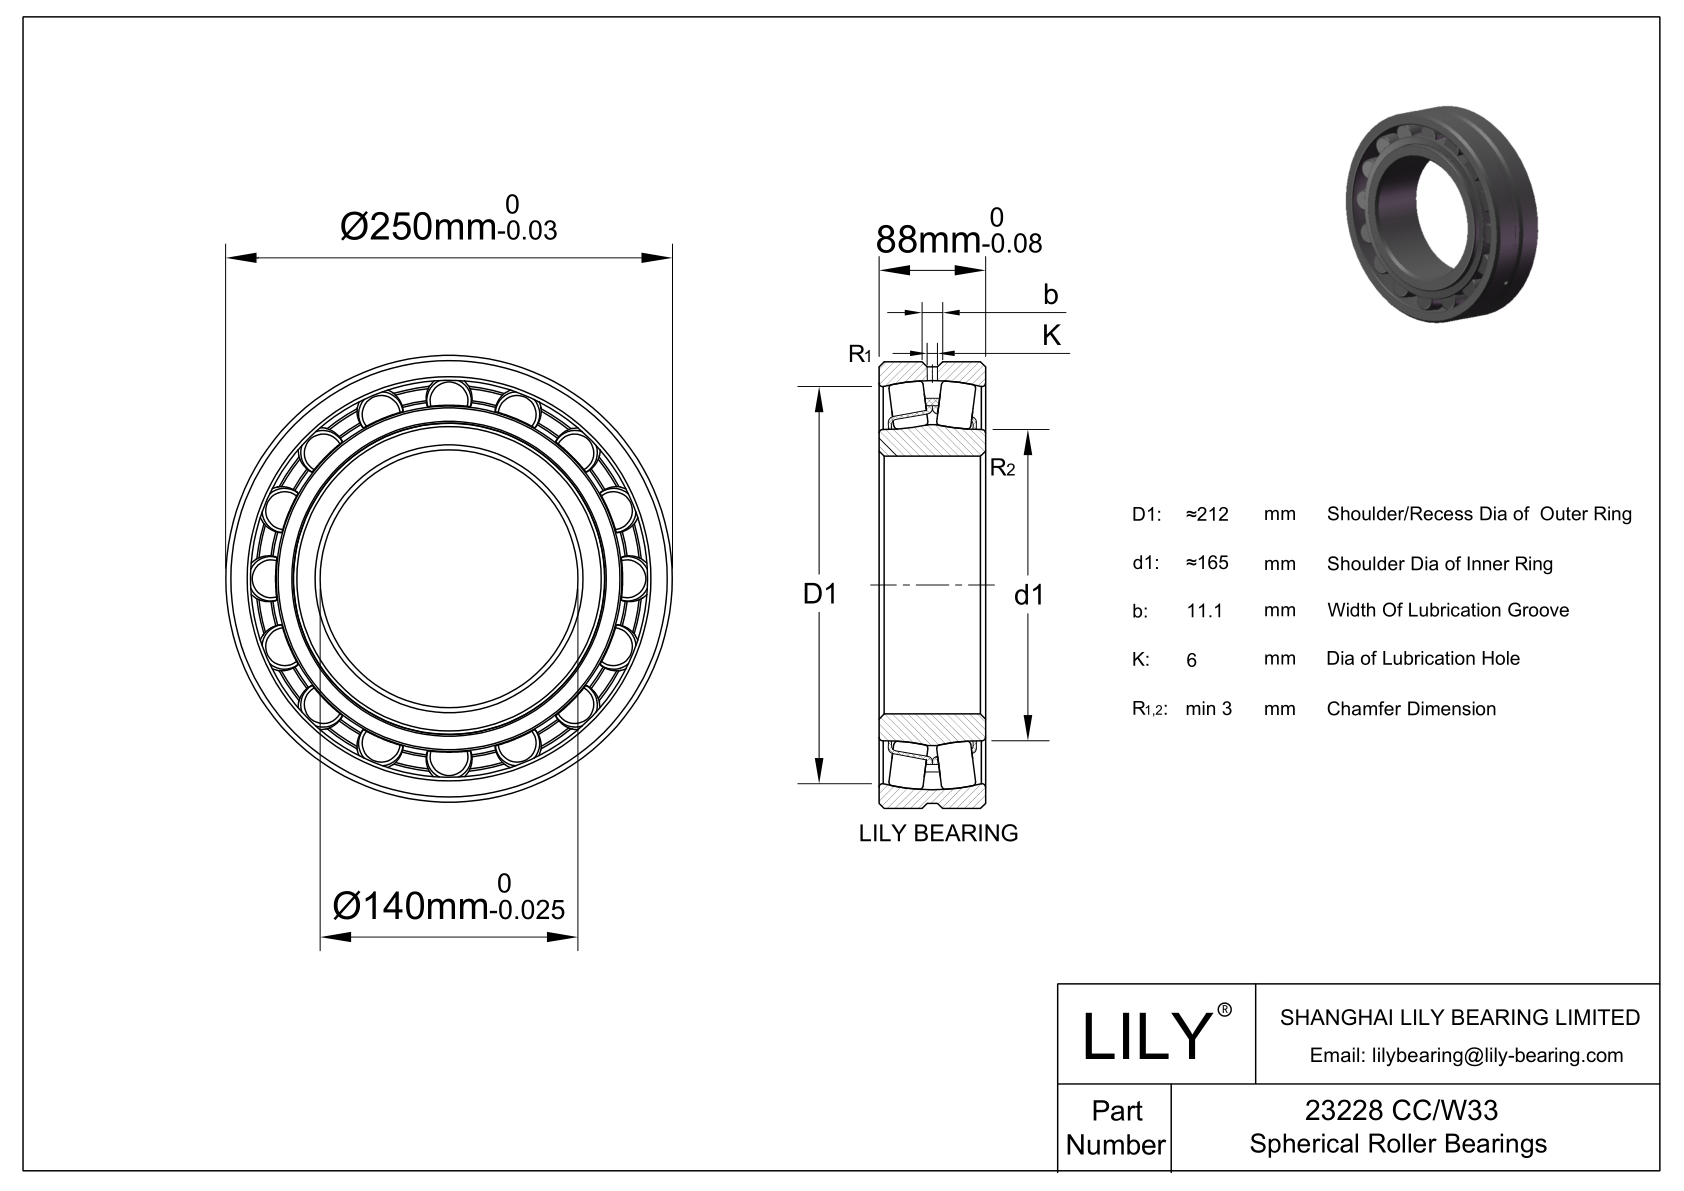 23228 CC/W33 Double Row Spherical Roller Bearing cad drawing